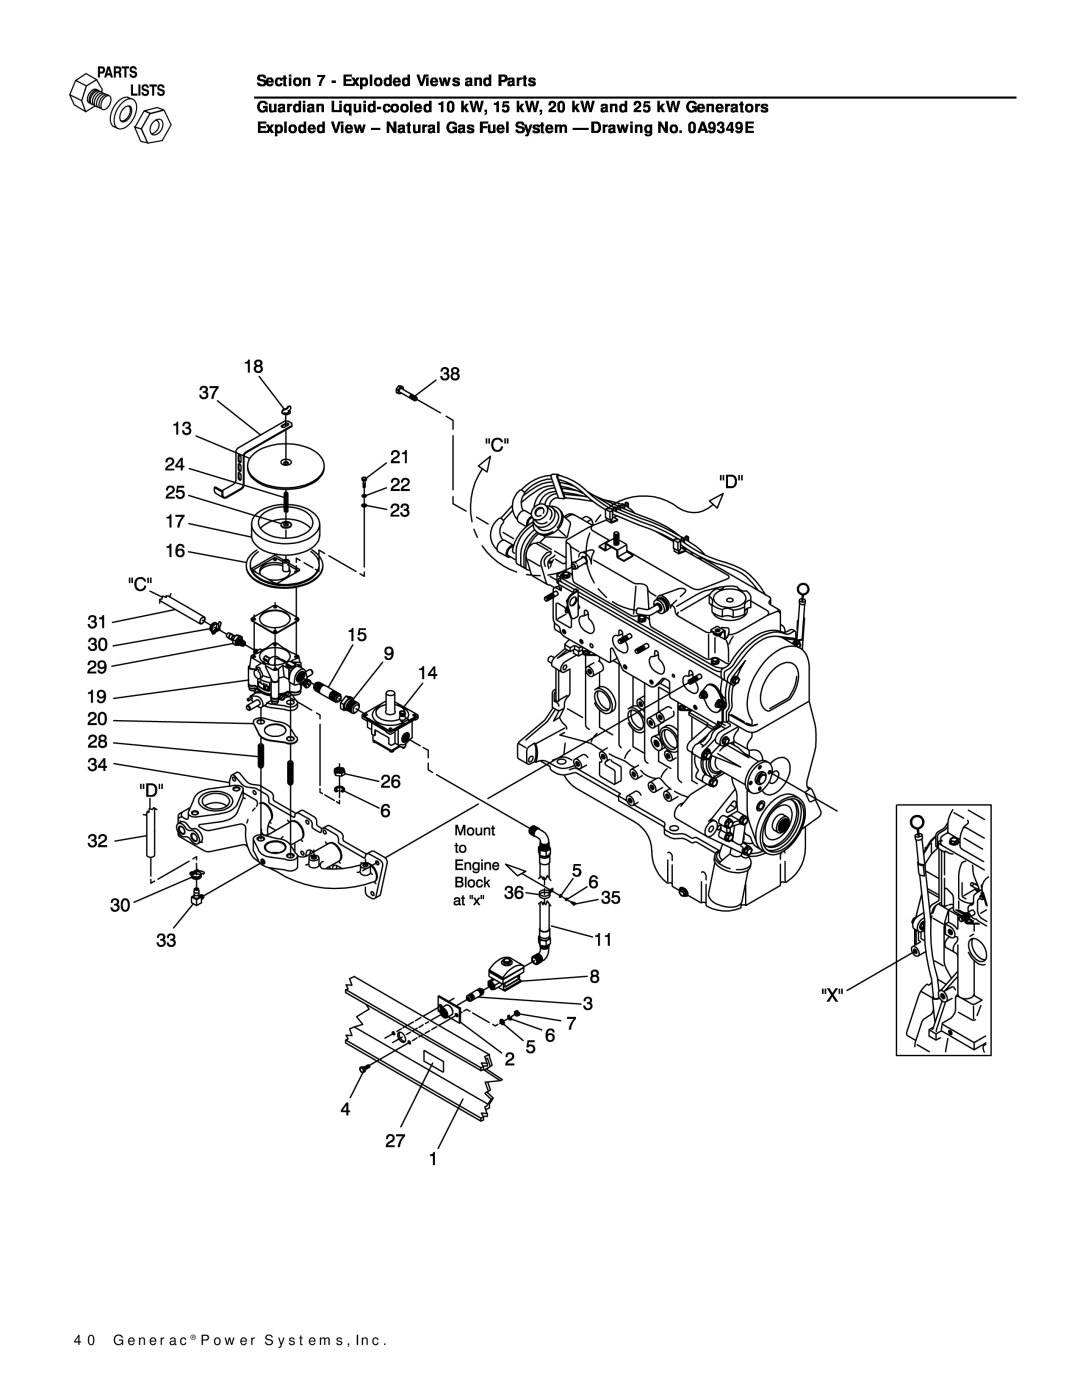 Generac Power Systems owner manual Exploded Views and Parts, Generac Power Systems, Inc 